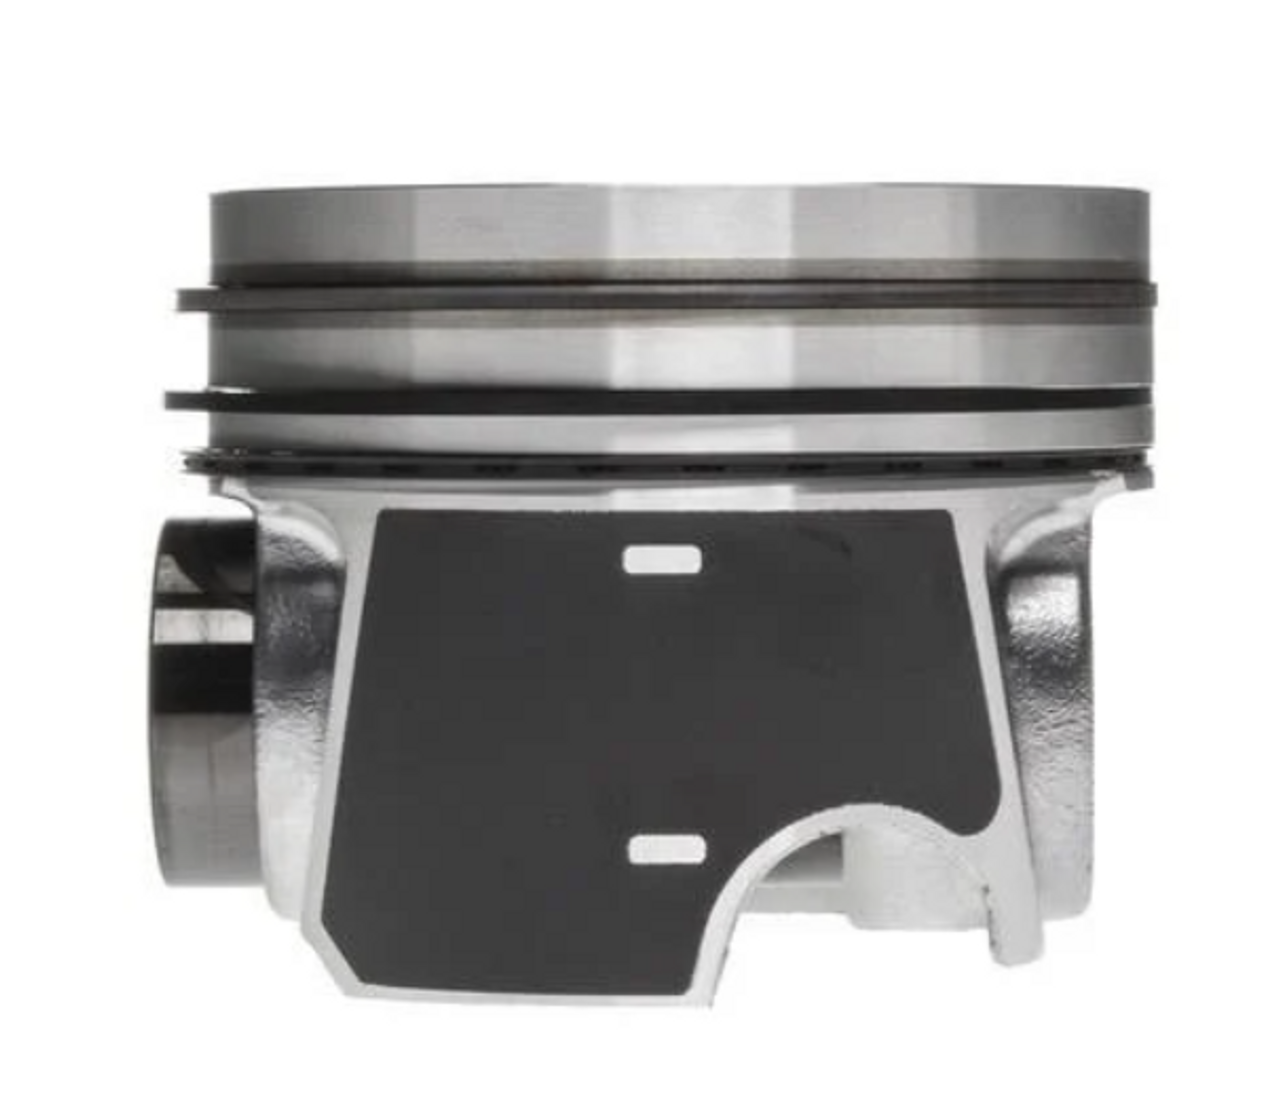 Mahle Maxx Force 7 Piston With Rings Standard 2008 to 2010 6.4L Powerstroke MCI224-3851WR